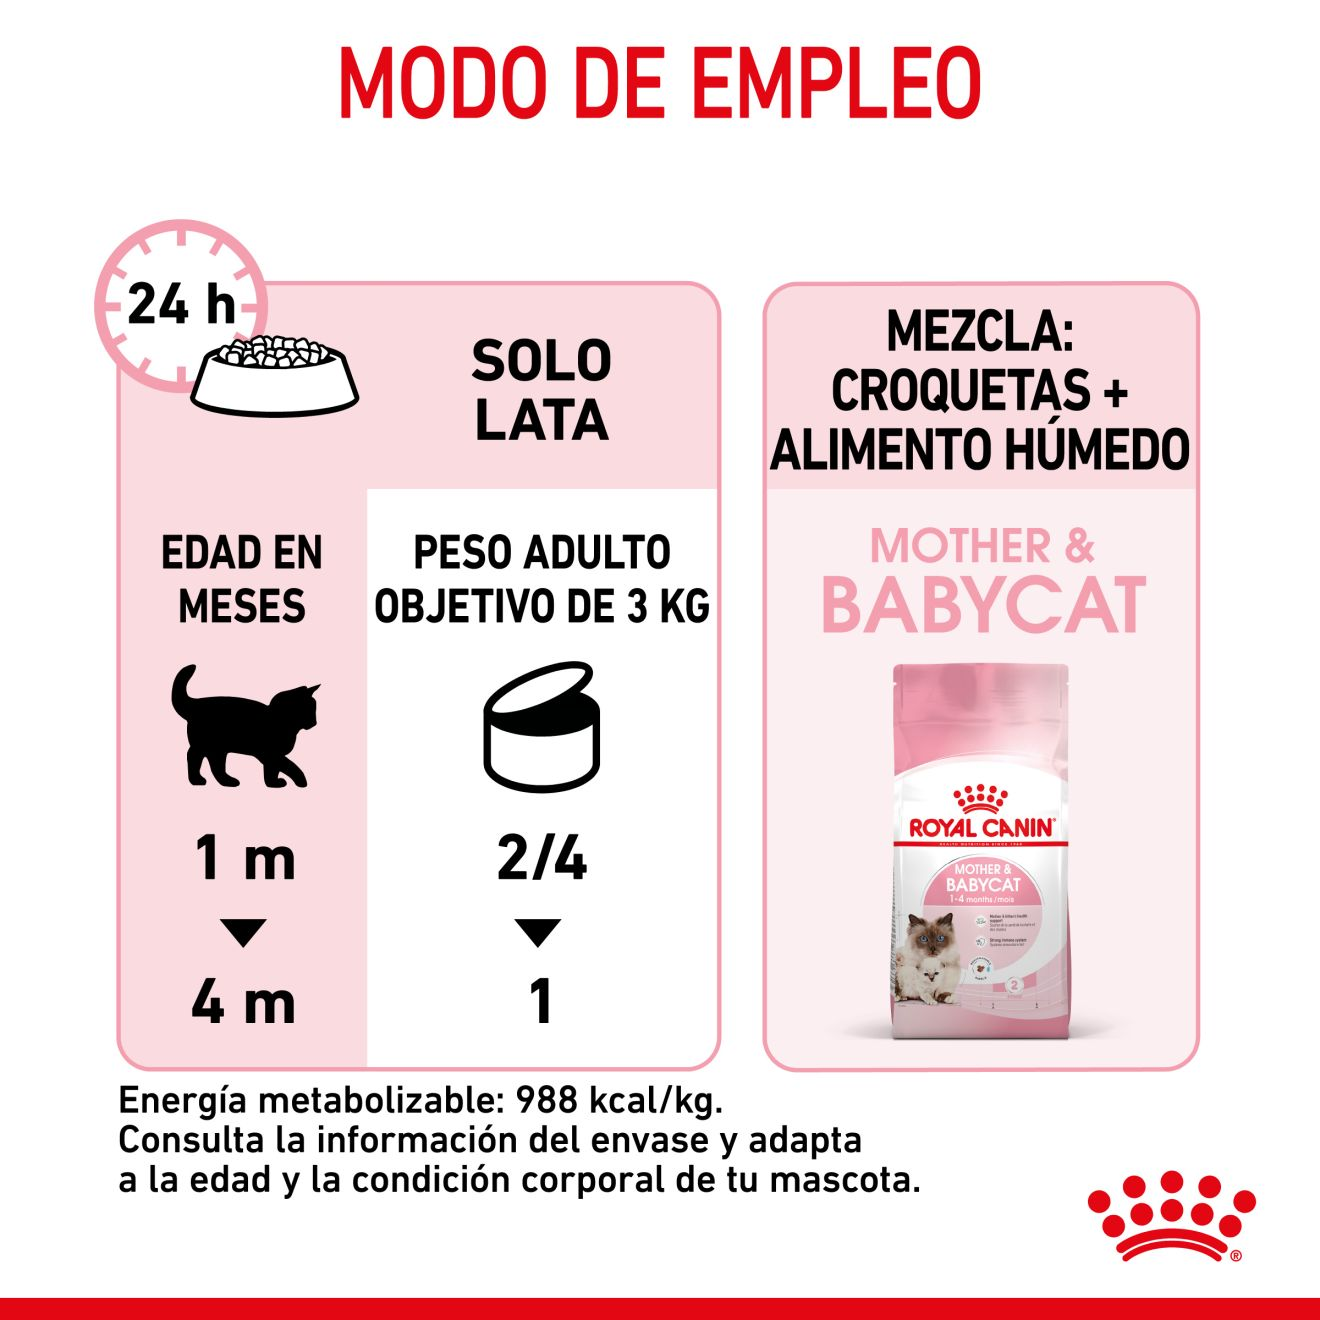 MOTHER & BABYCAT Ultra soft mousse